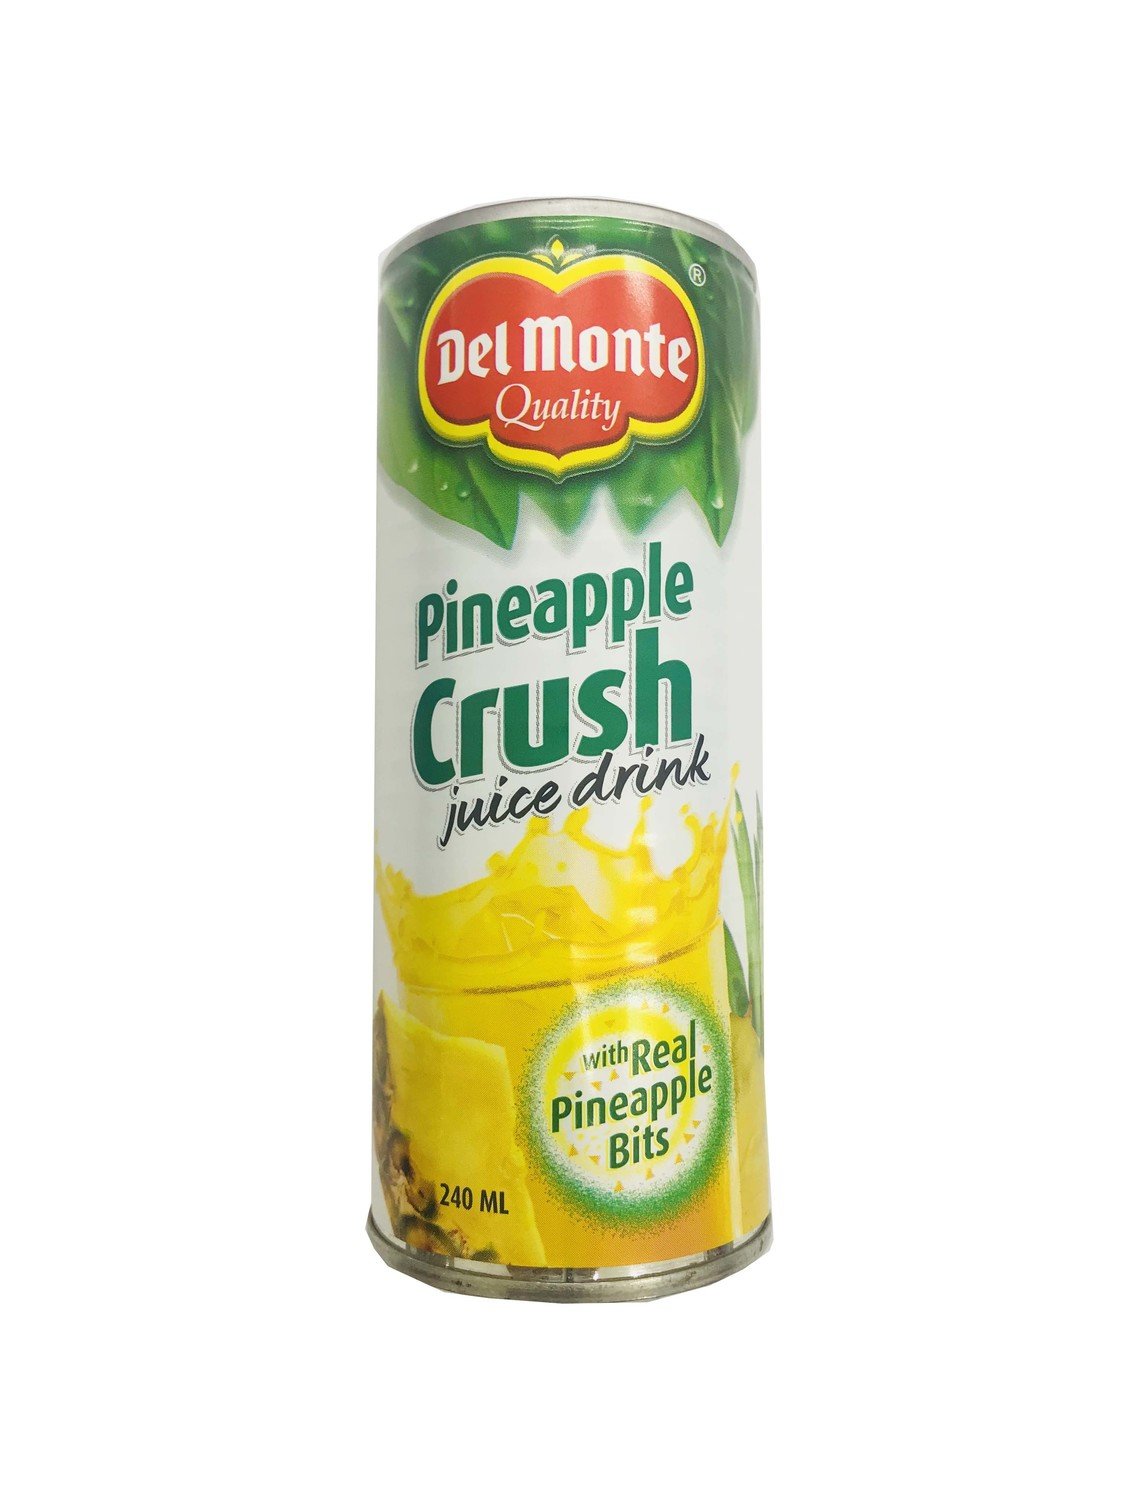 Del Monte Pineapple Crush Juice Drink with Real Pineapple Bits 240ml